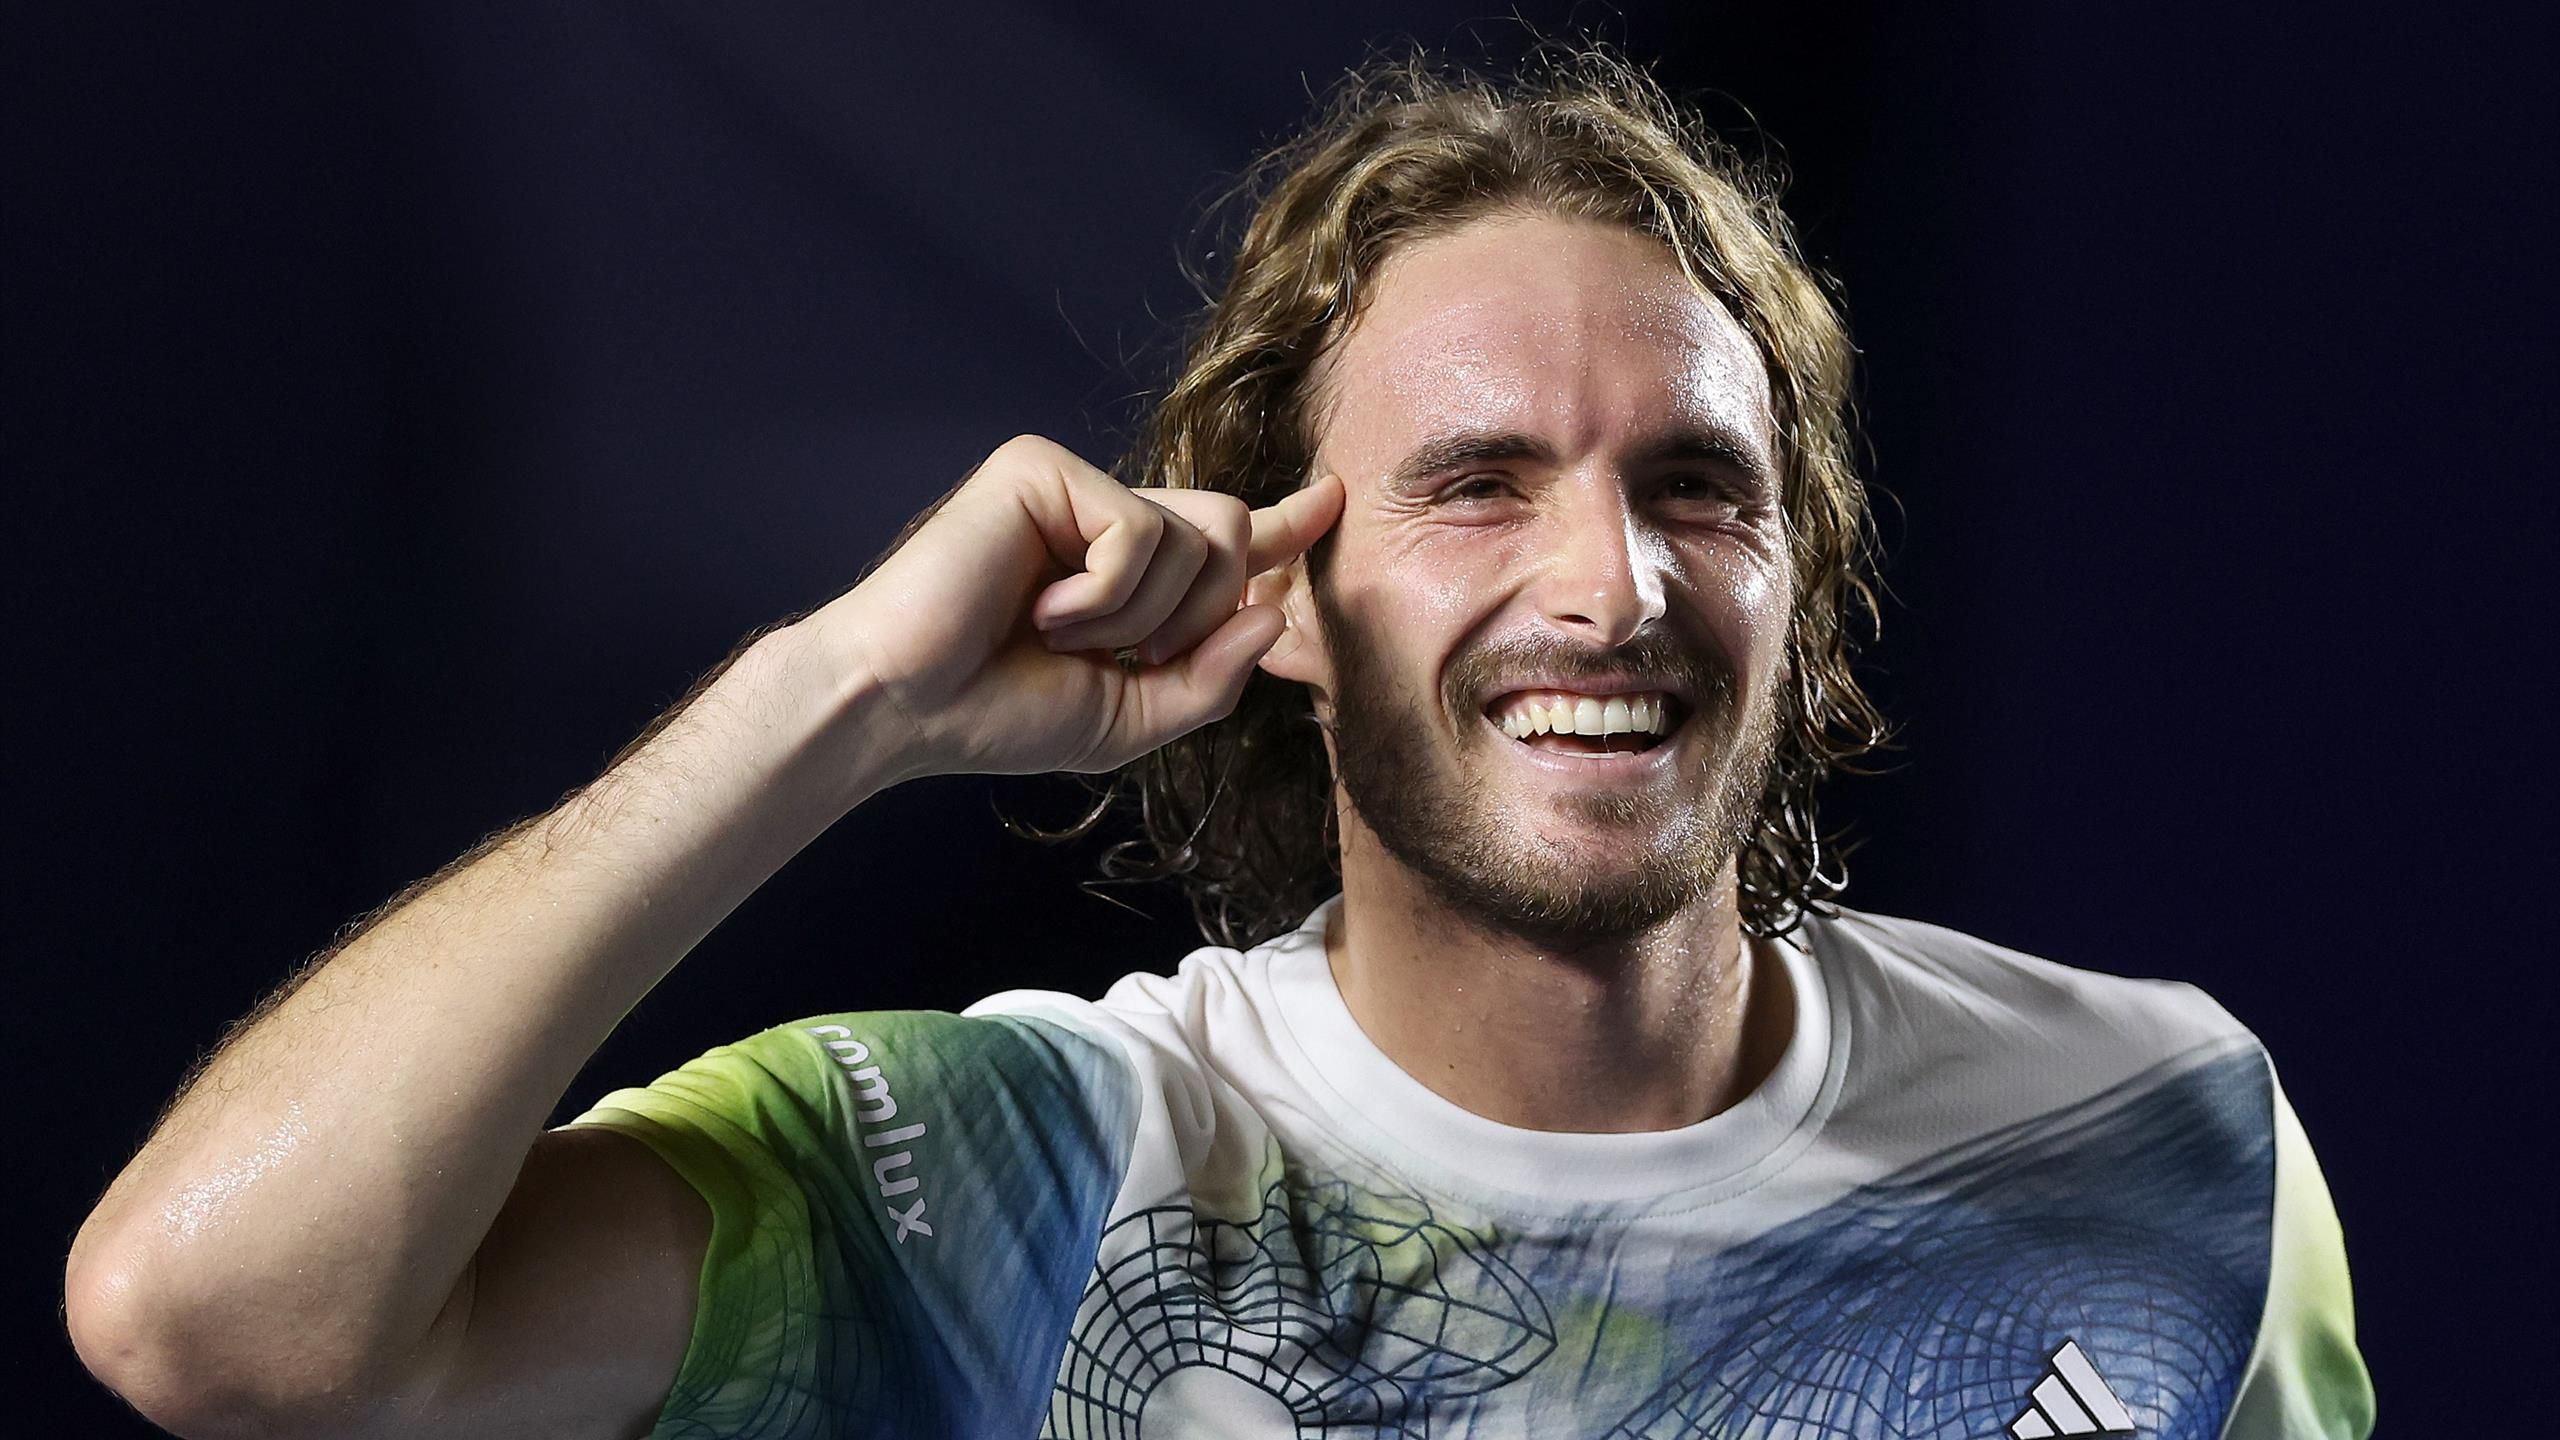 Stefanos Tsitsipas re-hires Mark Philippoussis to ‘maximise career’ at Canadian Open – ‘I have felt at times stagnant’